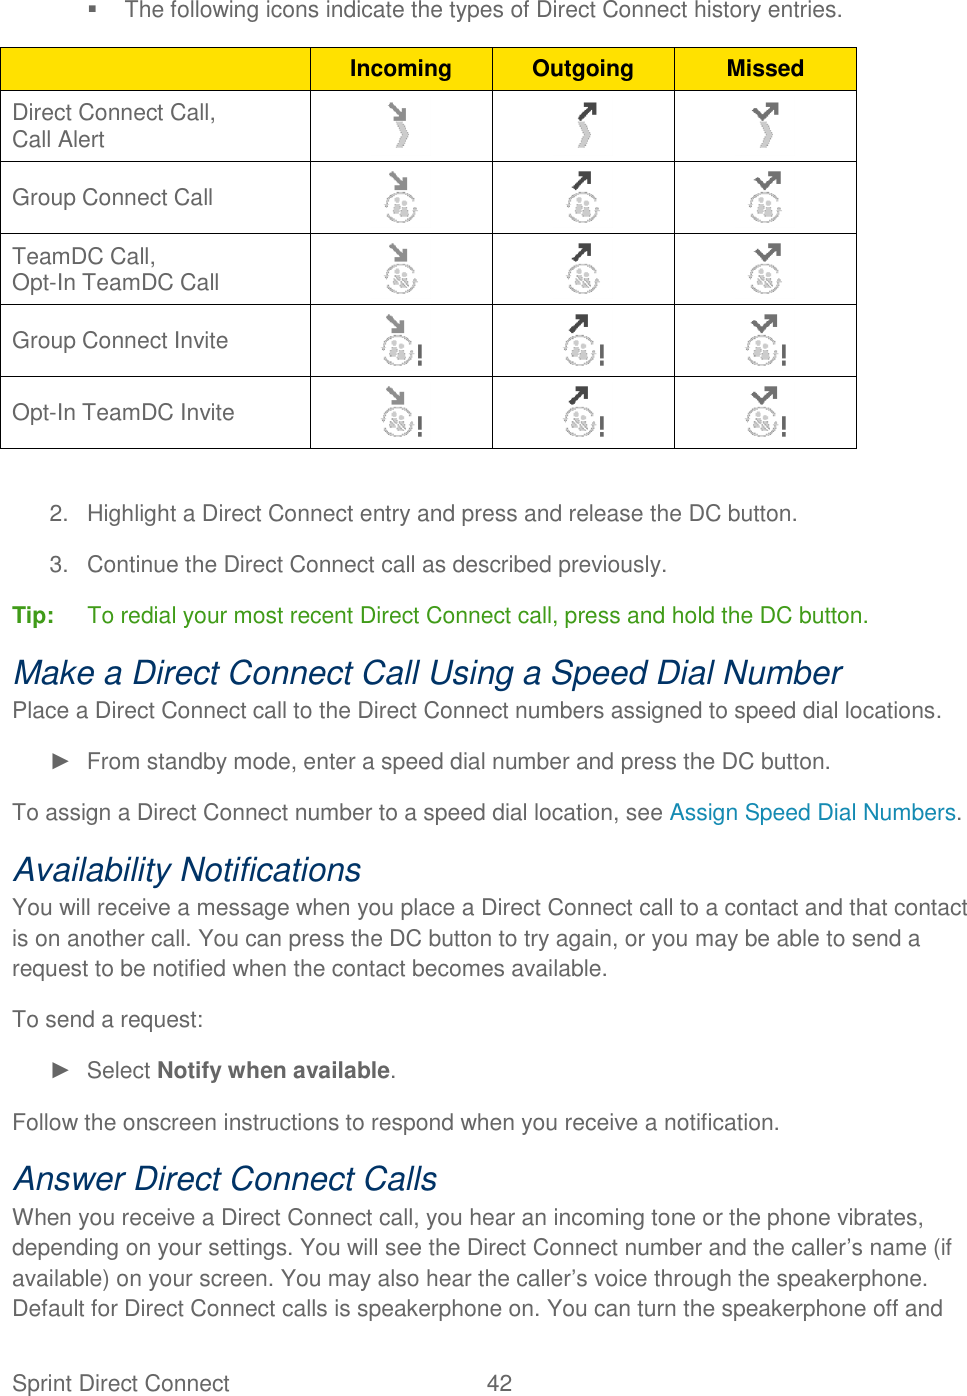  Sprint Direct Connect  42     The following icons indicate the types of Direct Connect history entries.   Incoming Outgoing Missed Direct Connect Call, Call Alert    Group Connect Call    TeamDC Call, Opt-In TeamDC Call    Group Connect Invite    Opt-In TeamDC Invite     2.  Highlight a Direct Connect entry and press and release the DC button. 3.  Continue the Direct Connect call as described previously. Tip:  To redial your most recent Direct Connect call, press and hold the DC button. Make a Direct Connect Call Using a Speed Dial Number Place a Direct Connect call to the Direct Connect numbers assigned to speed dial locations. ►  From standby mode, enter a speed dial number and press the DC button. To assign a Direct Connect number to a speed dial location, see Assign Speed Dial Numbers. Availability Notifications You will receive a message when you place a Direct Connect call to a contact and that contact is on another call. You can press the DC button to try again, or you may be able to send a request to be notified when the contact becomes available. To send a request: ►  Select Notify when available. Follow the onscreen instructions to respond when you receive a notification. Answer Direct Connect Calls When you receive a Direct Connect call, you hear an incoming tone or the phone vibrates, depending on your settings. You will see the Direct Connect number and the caller‘s name (if available) on your screen. You may also hear the caller‘s voice through the speakerphone. Default for Direct Connect calls is speakerphone on. You can turn the speakerphone off and 